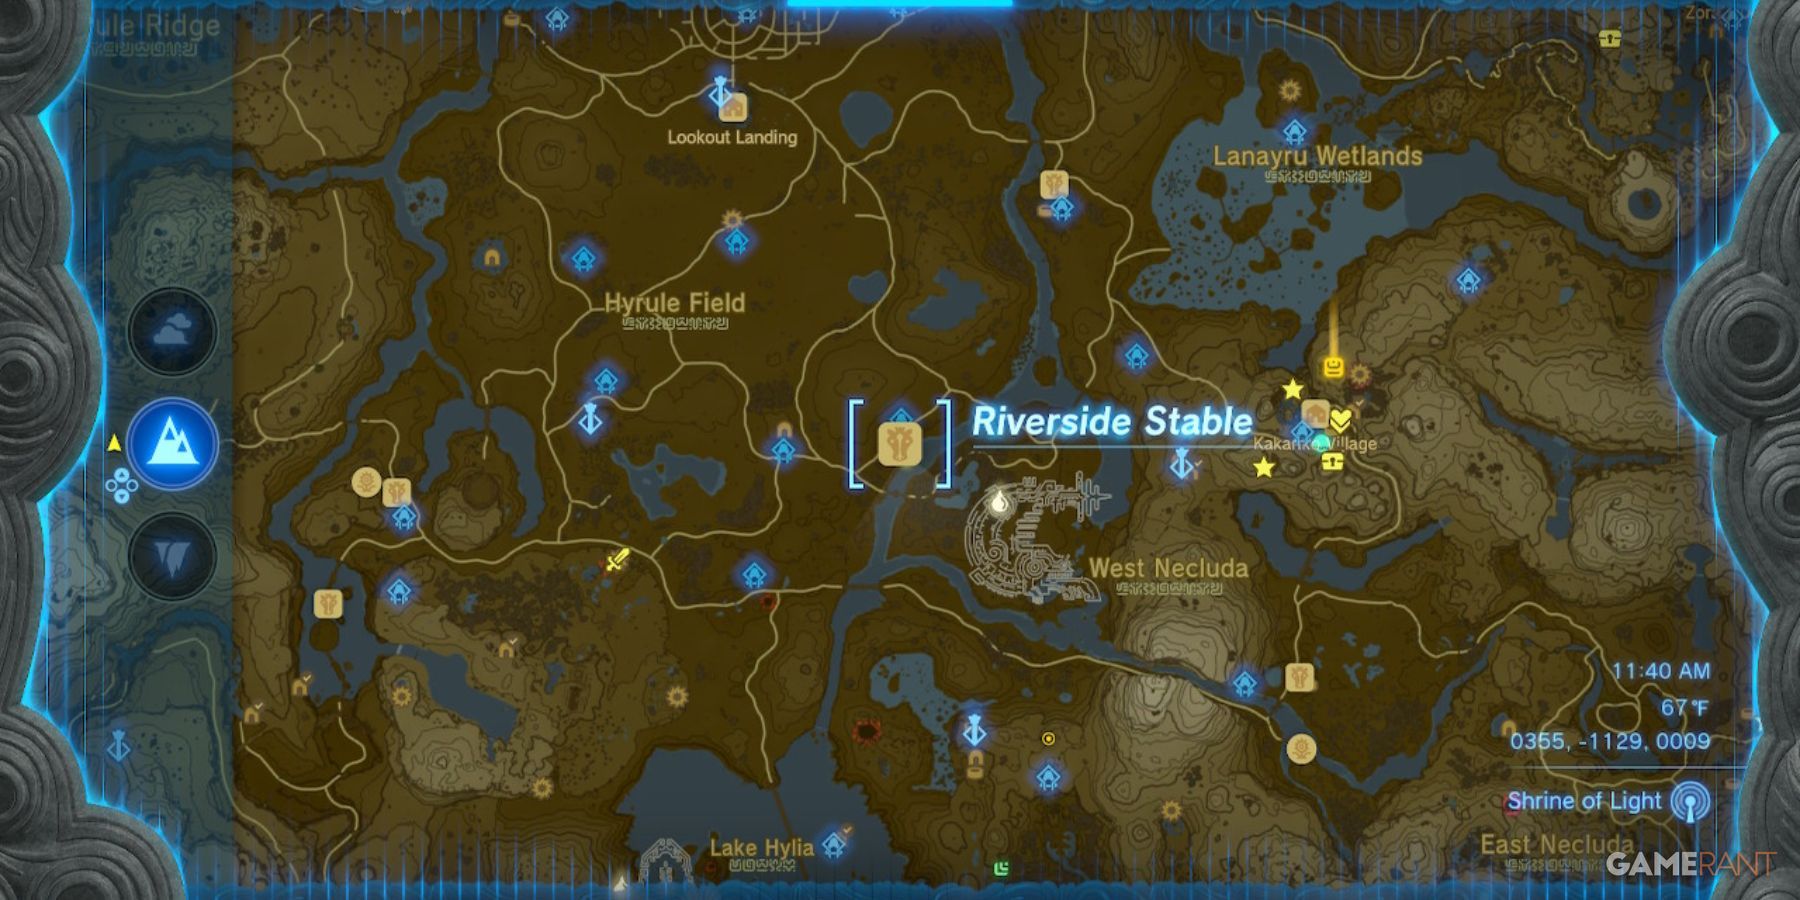 Legend of Zelda: Tears of the Kingdom stable coordinates on the riverbank